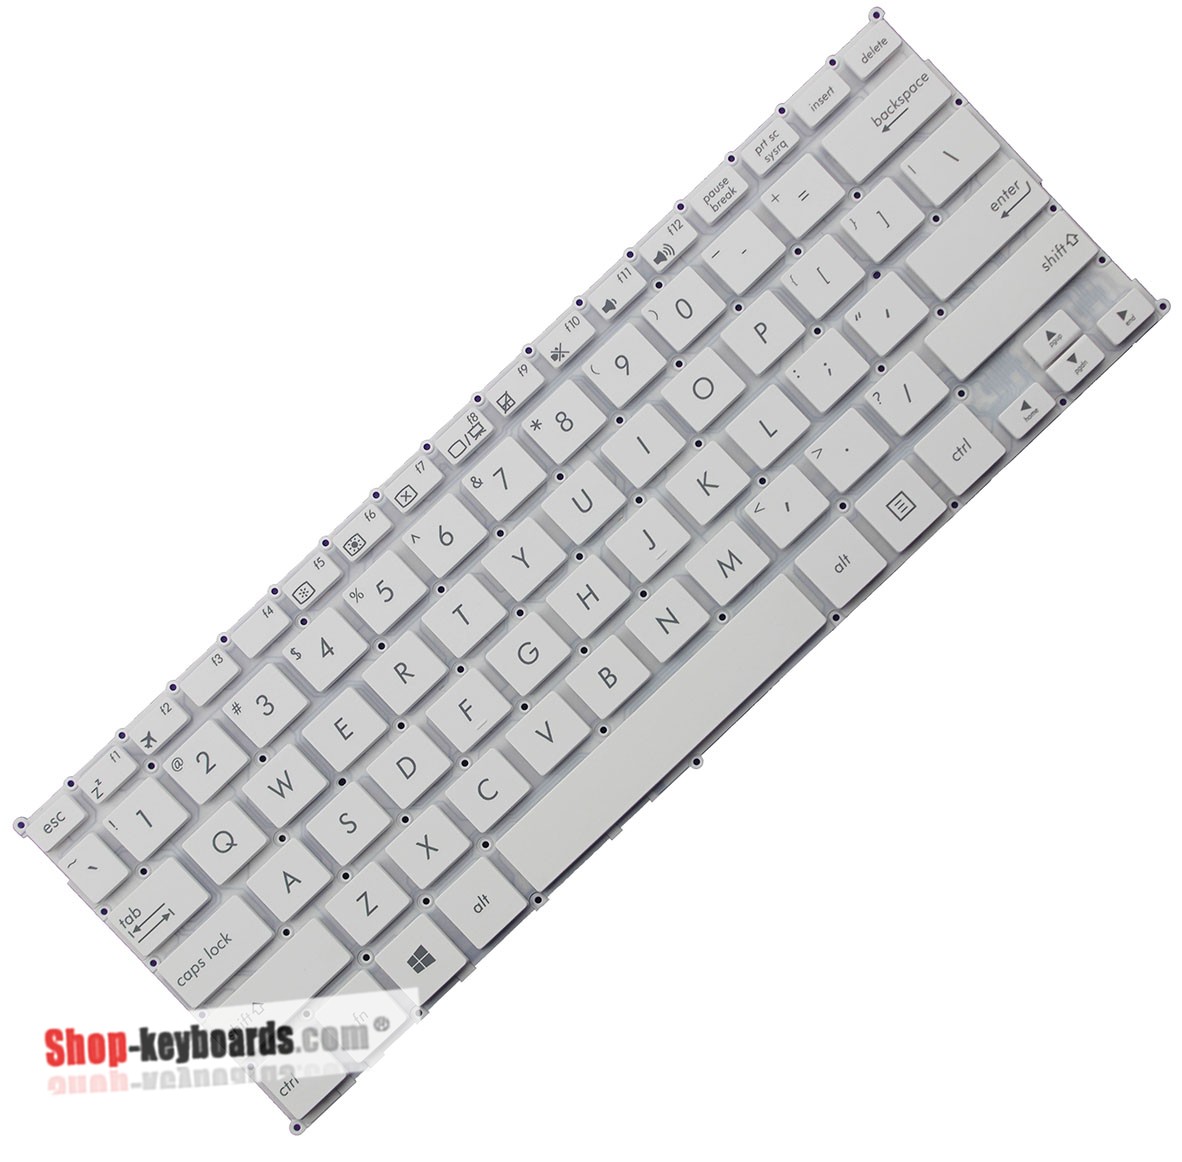 Asus 0KNL0-1120IT00 Keyboard replacement